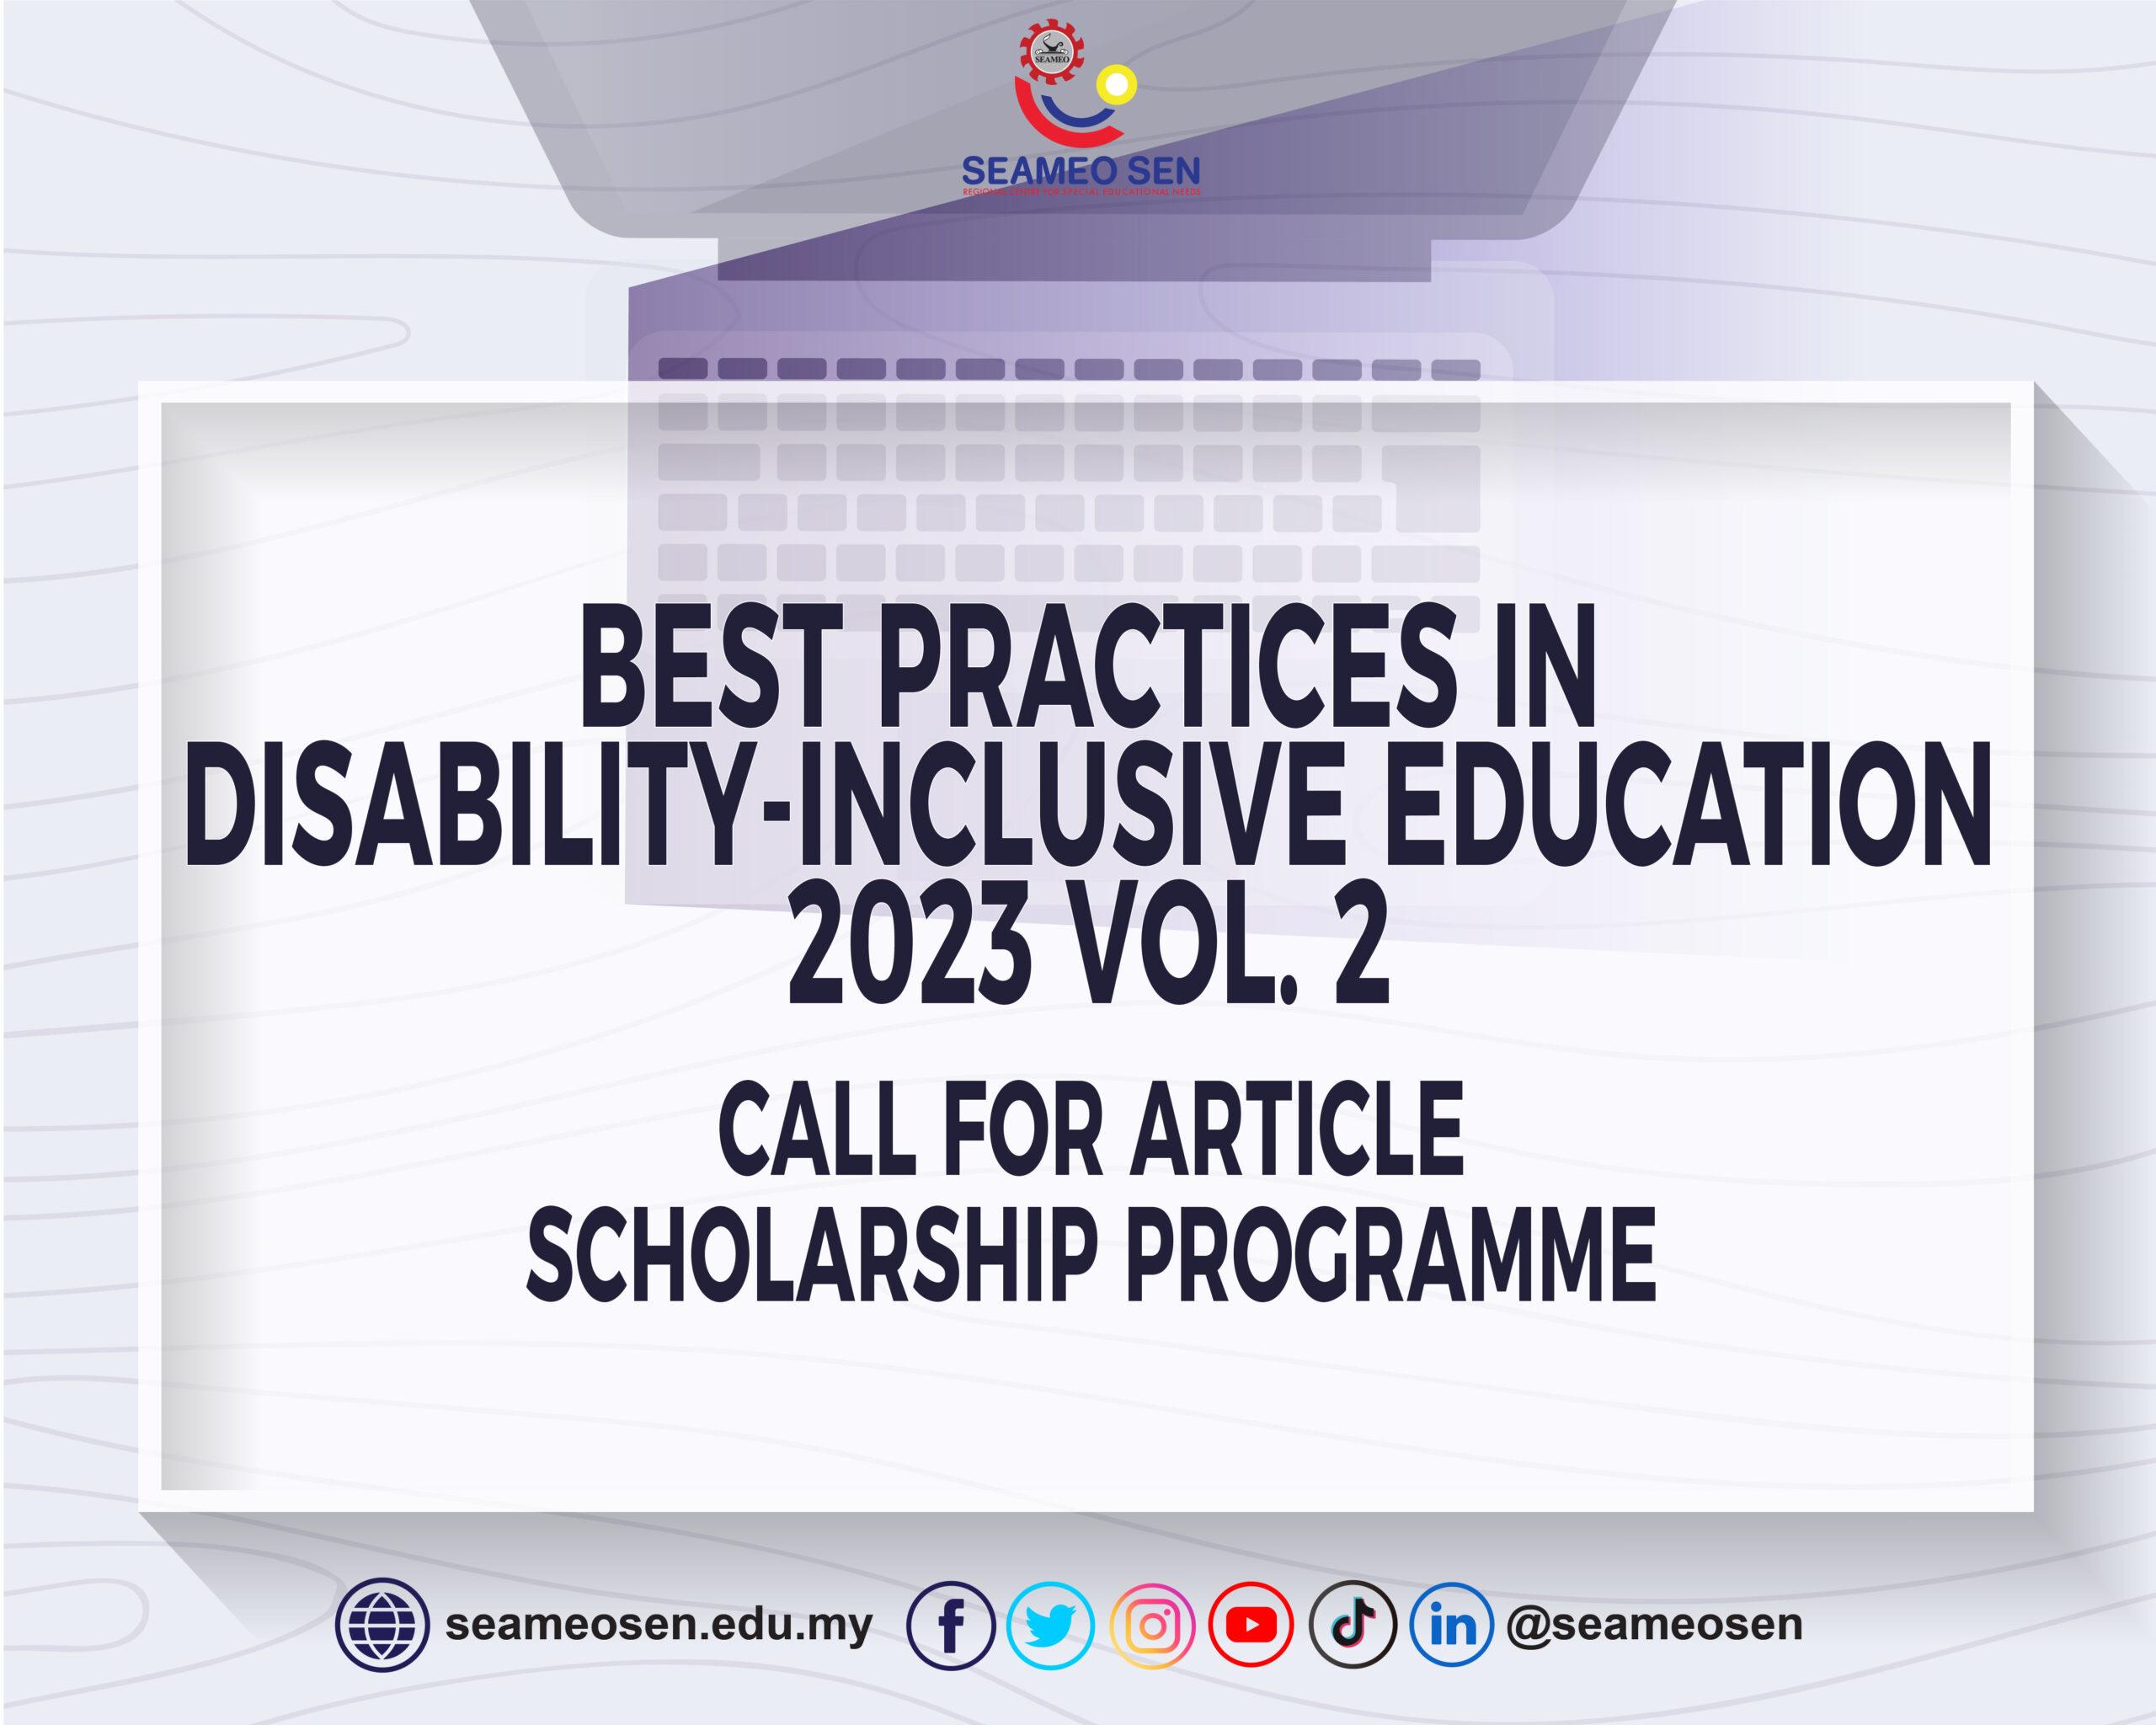 Best Practices in Disability-Inclusive Education Book 2023 Vol. 2